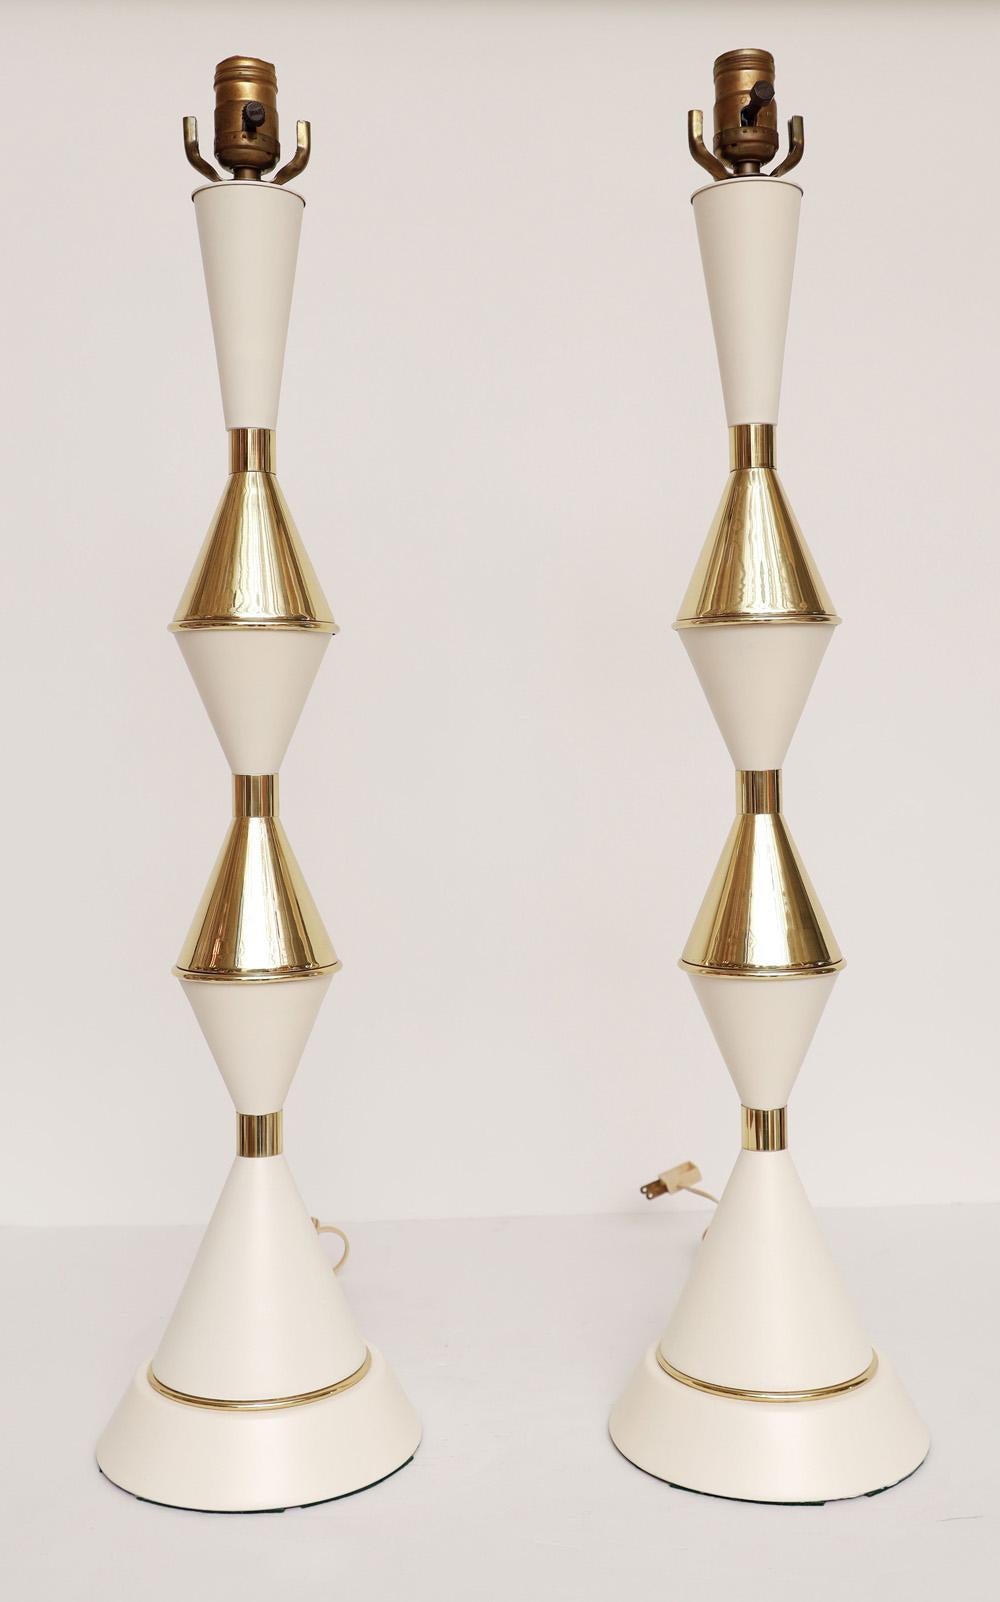 Majestic pair of 50's Polished brass and white lamps in the style of Tommi Parzinger. 
Tall and elegant, Perfect pair for a credenza or nightstands.

We love them!